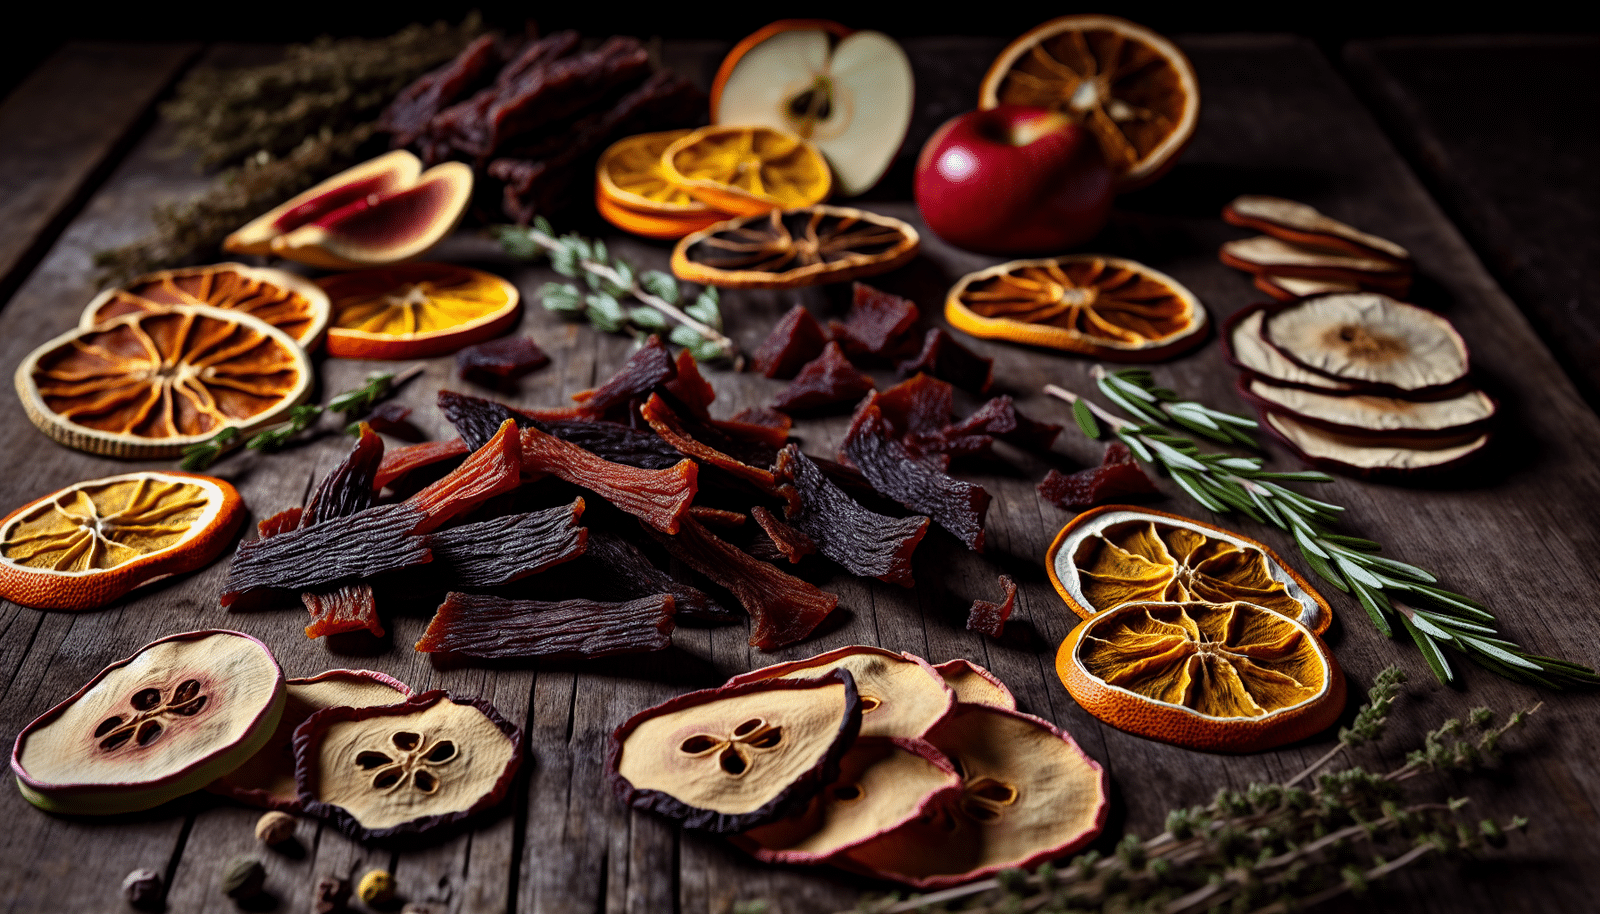 Assortment of dried foods including jerky, fruit slices, and herbs